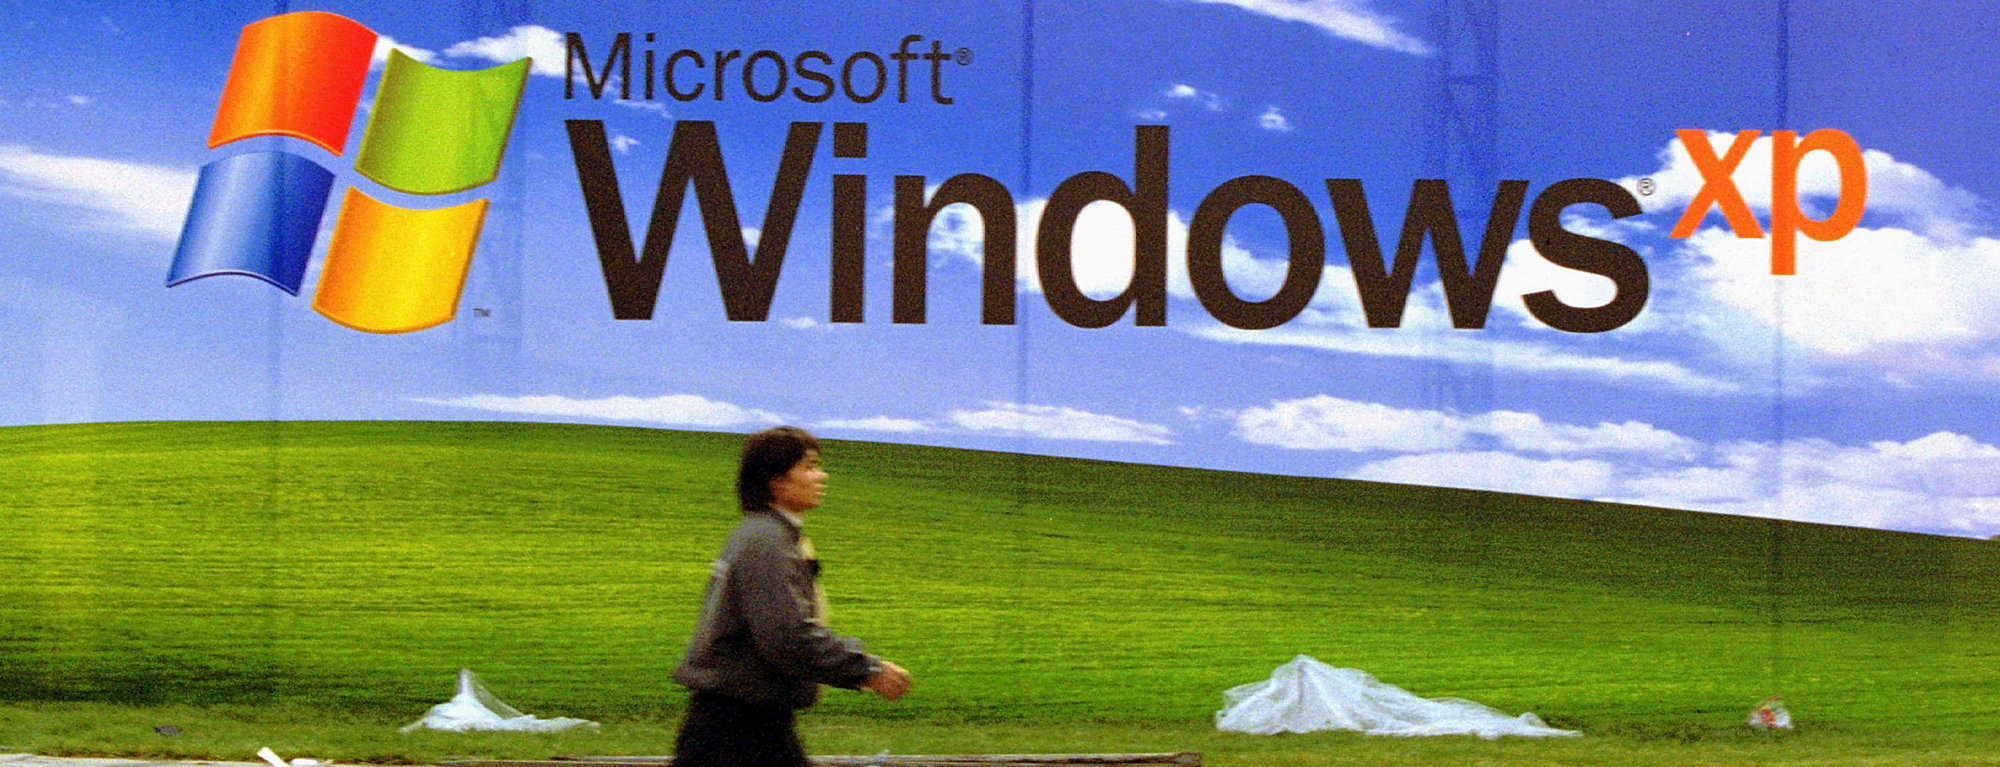 FOLLOW  Worlds most viewed photo  Default wallpaper of Windows XP  Bliss created by Charles ORear in 1996 became the default  Instagram